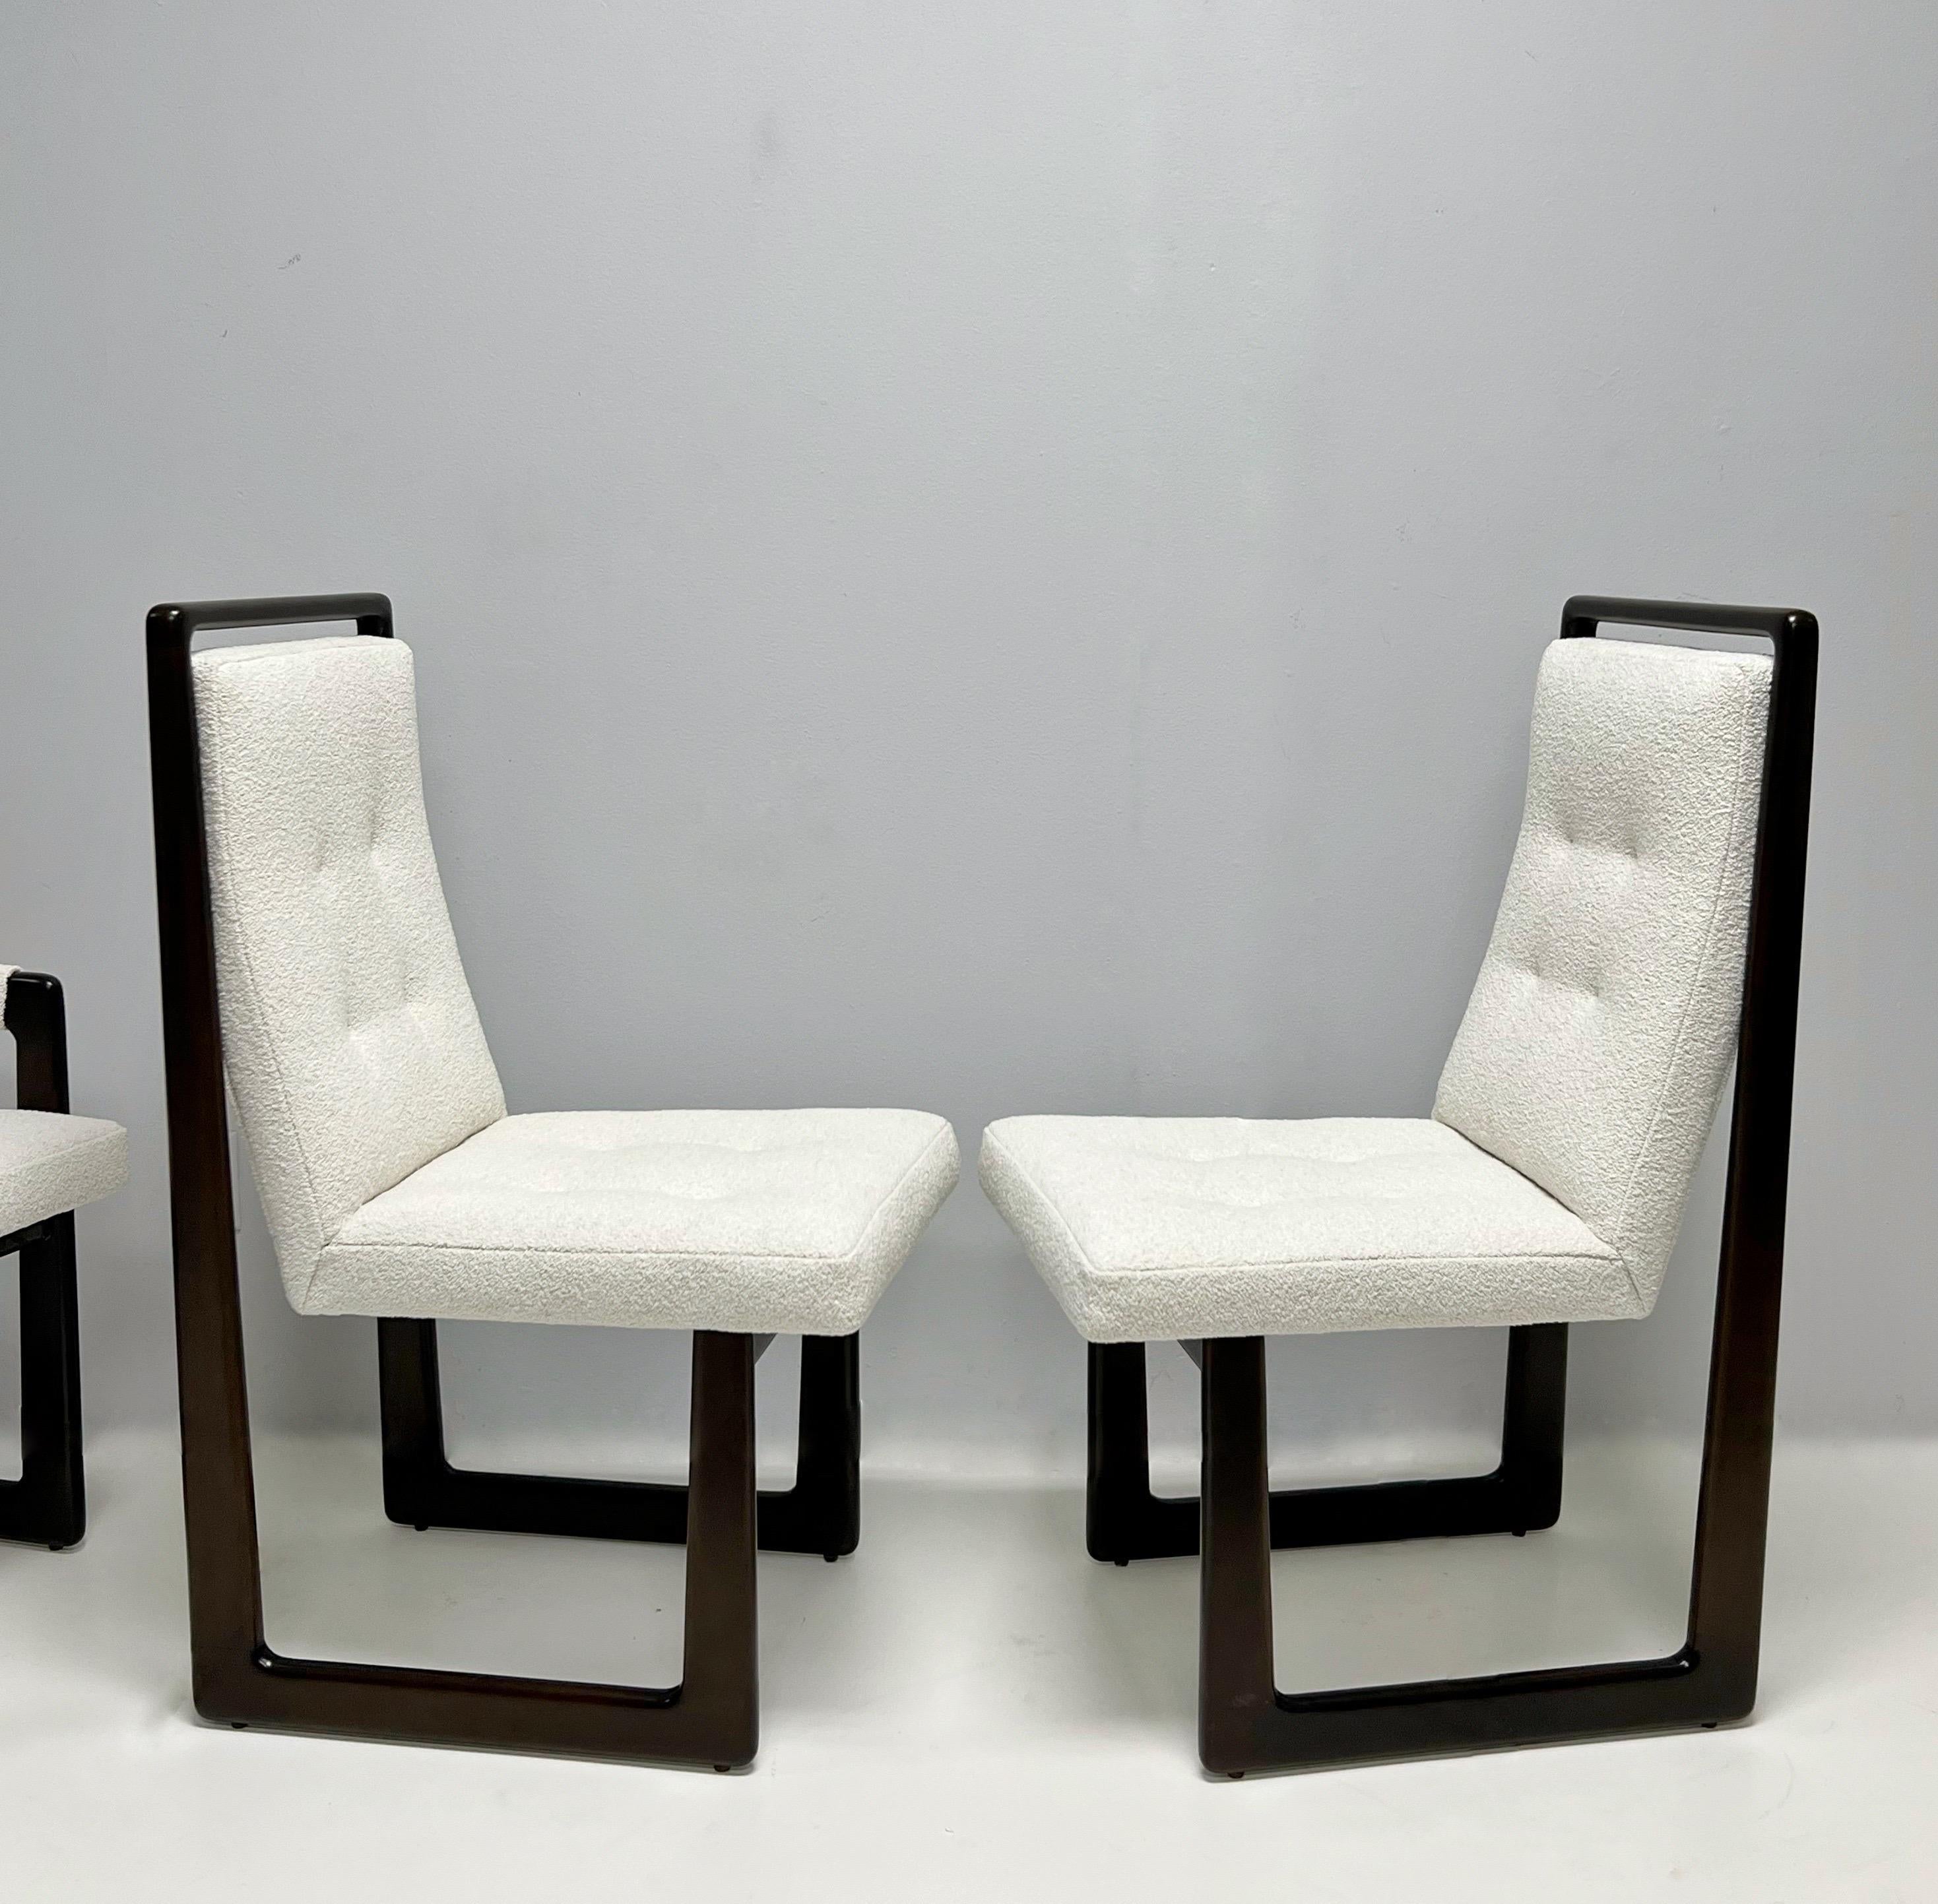 Mid-20th Century Vladimir Kagan 6 Sculptural Cubist Dining Chairs For Sale